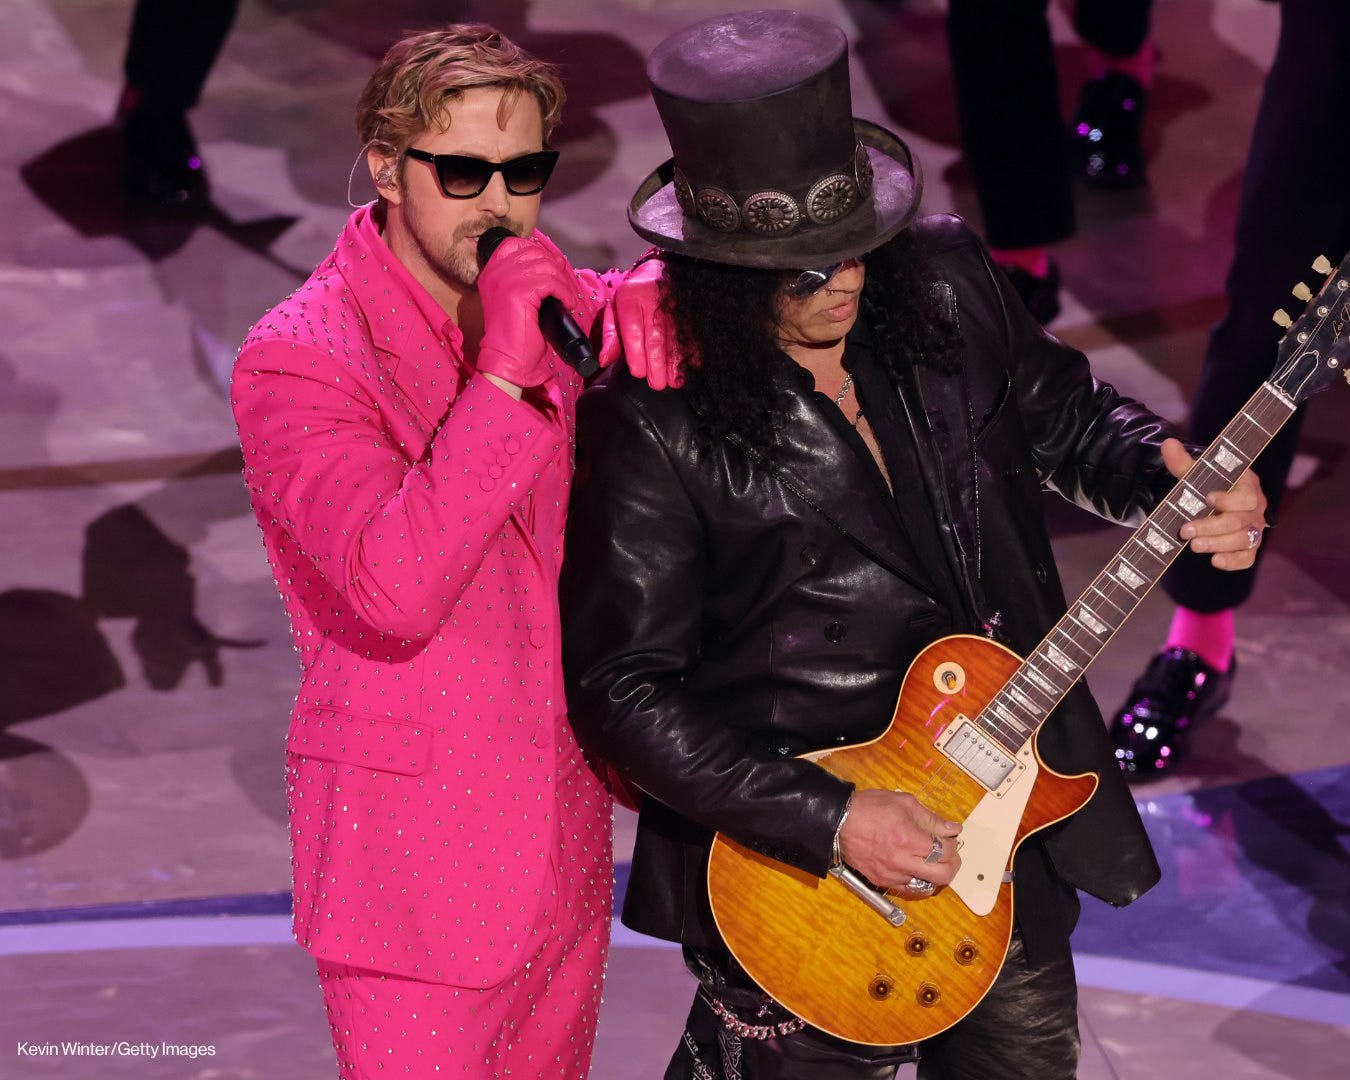 Ryan Gosling and Slash perform “I’m Just Ken” at the 96th Academy Awards